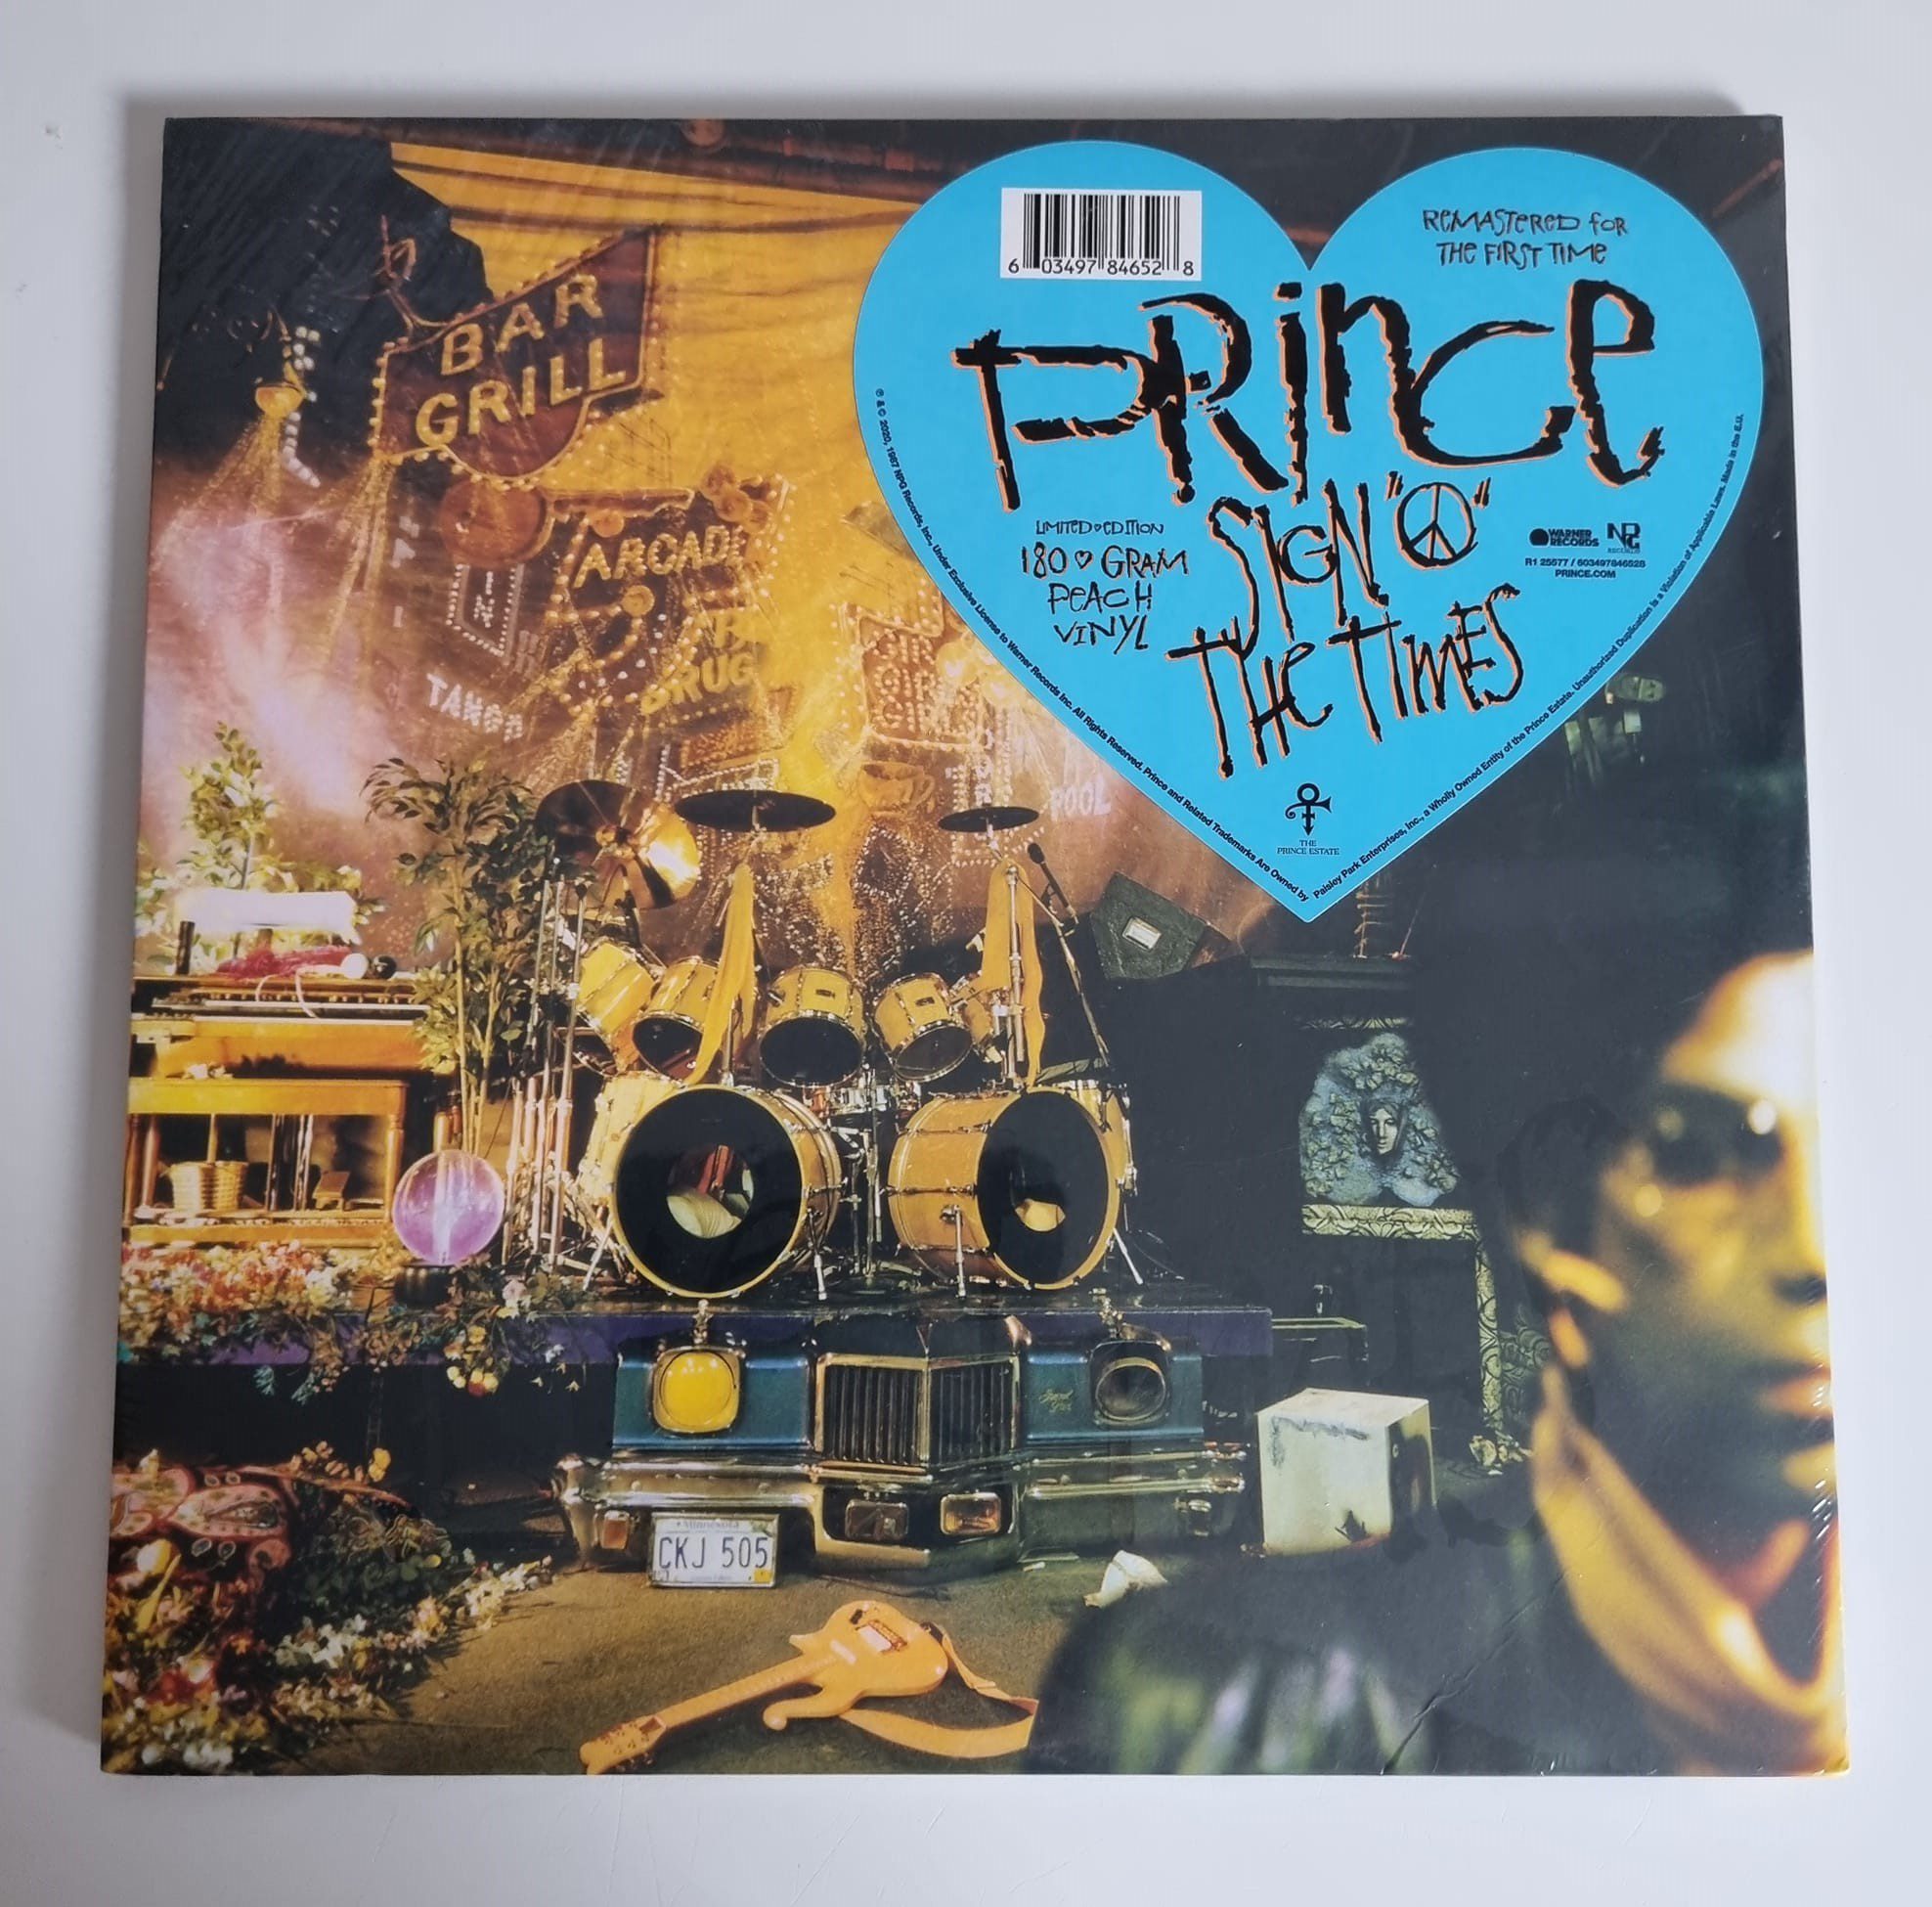 Buy this rare Prince record by clicking here